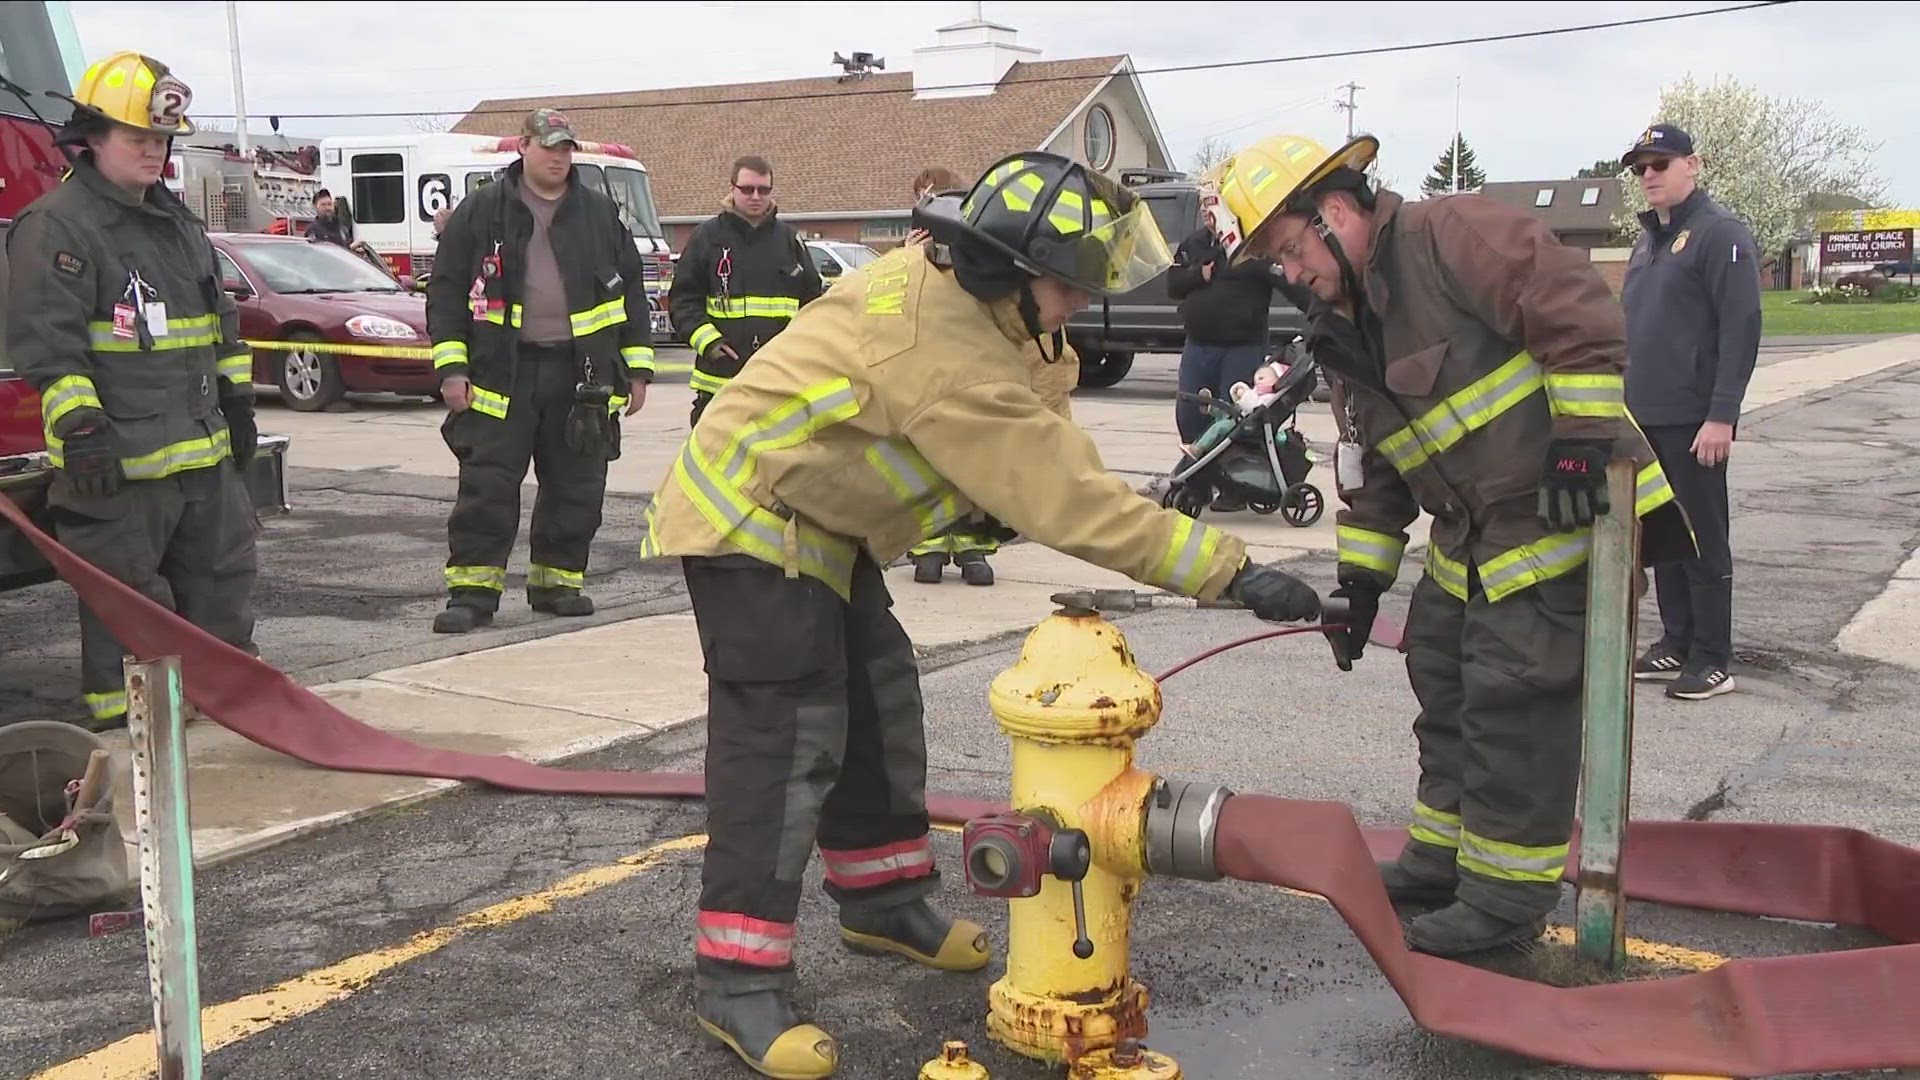 The Depew Fire Department says there is a job for anyone who is interested, regardless of their abilities.